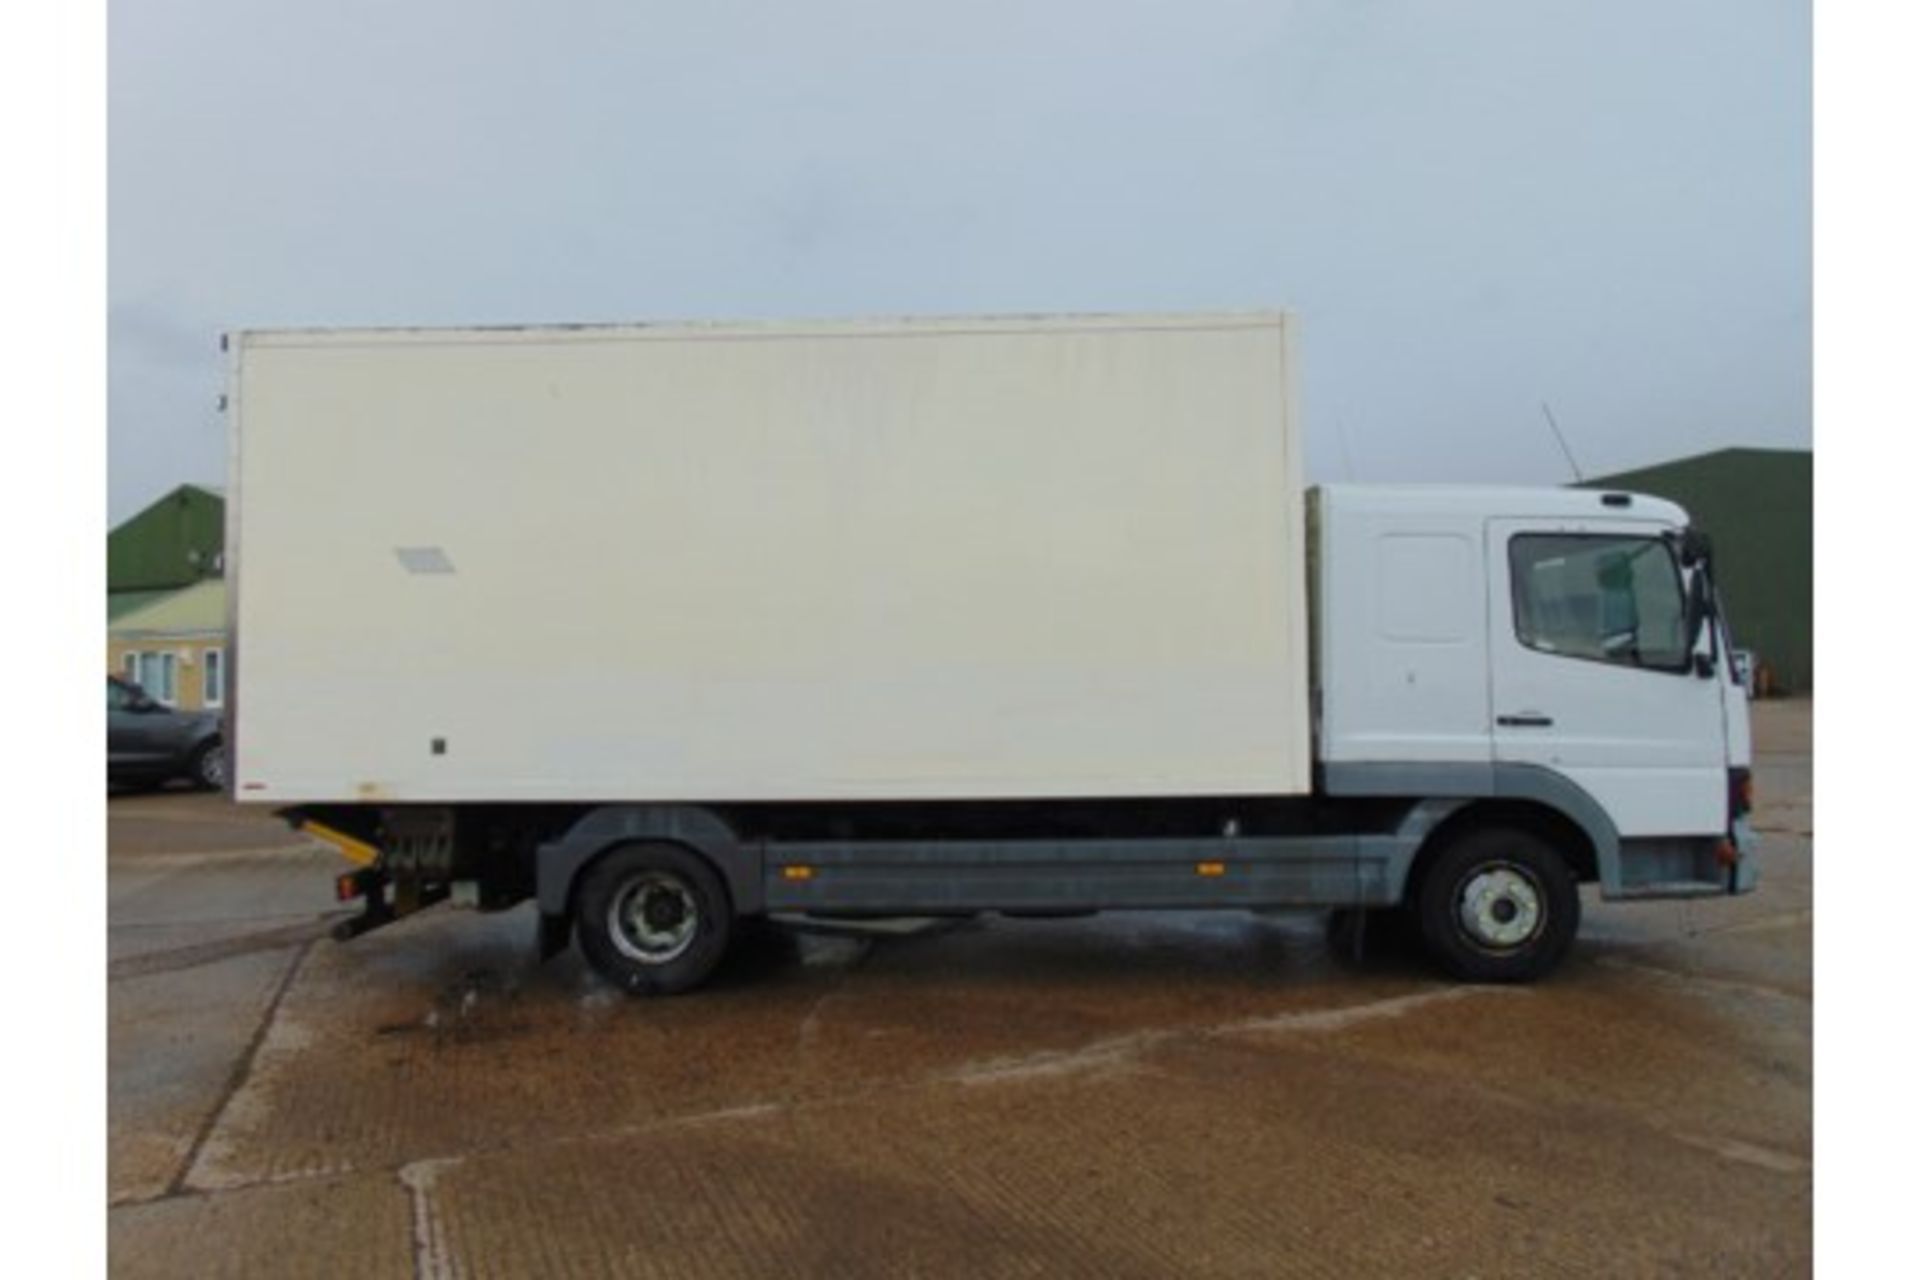 2001 Mercedes Benz Atego 1018 Box Truck C/W Tail Lift - Image 8 of 21